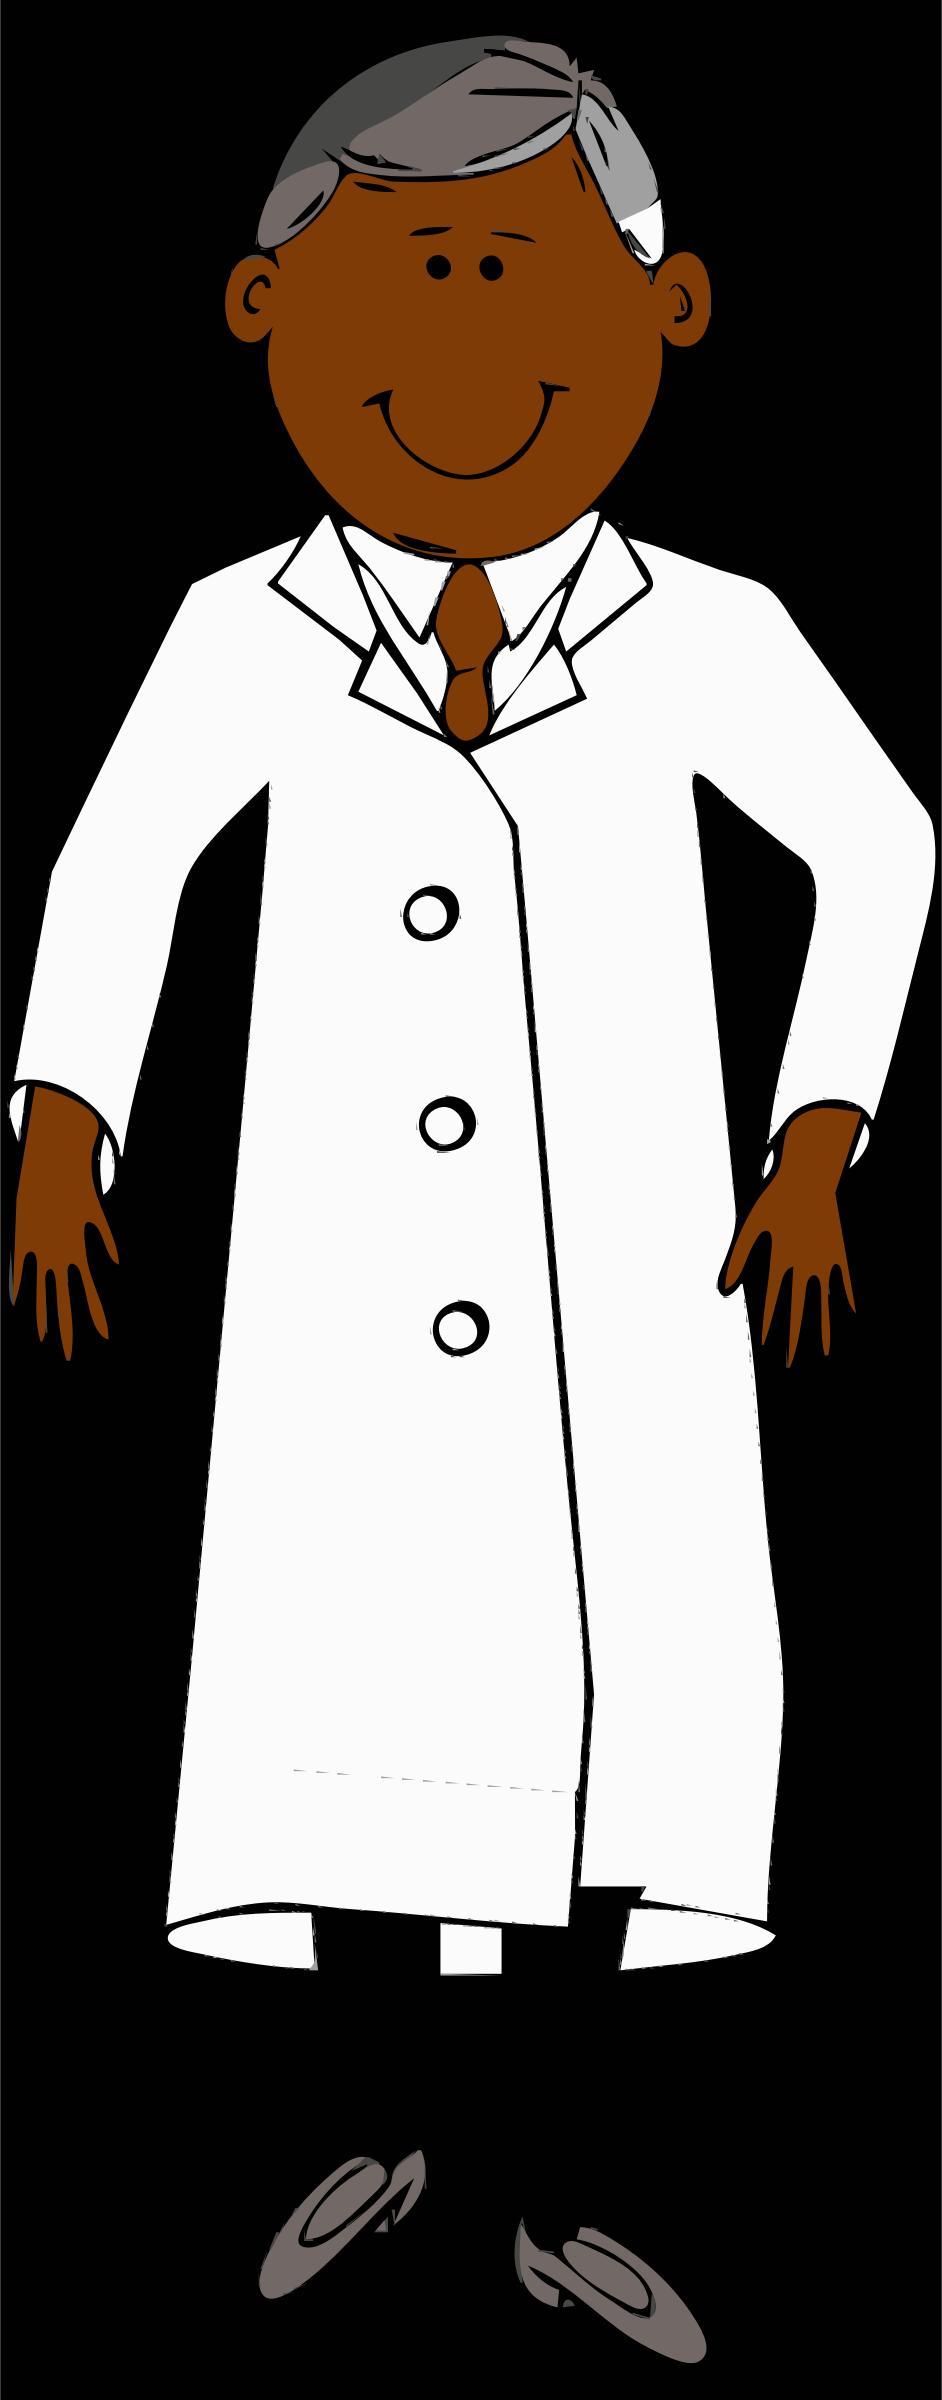 lab coat worn by scientist with grey hair png transparent